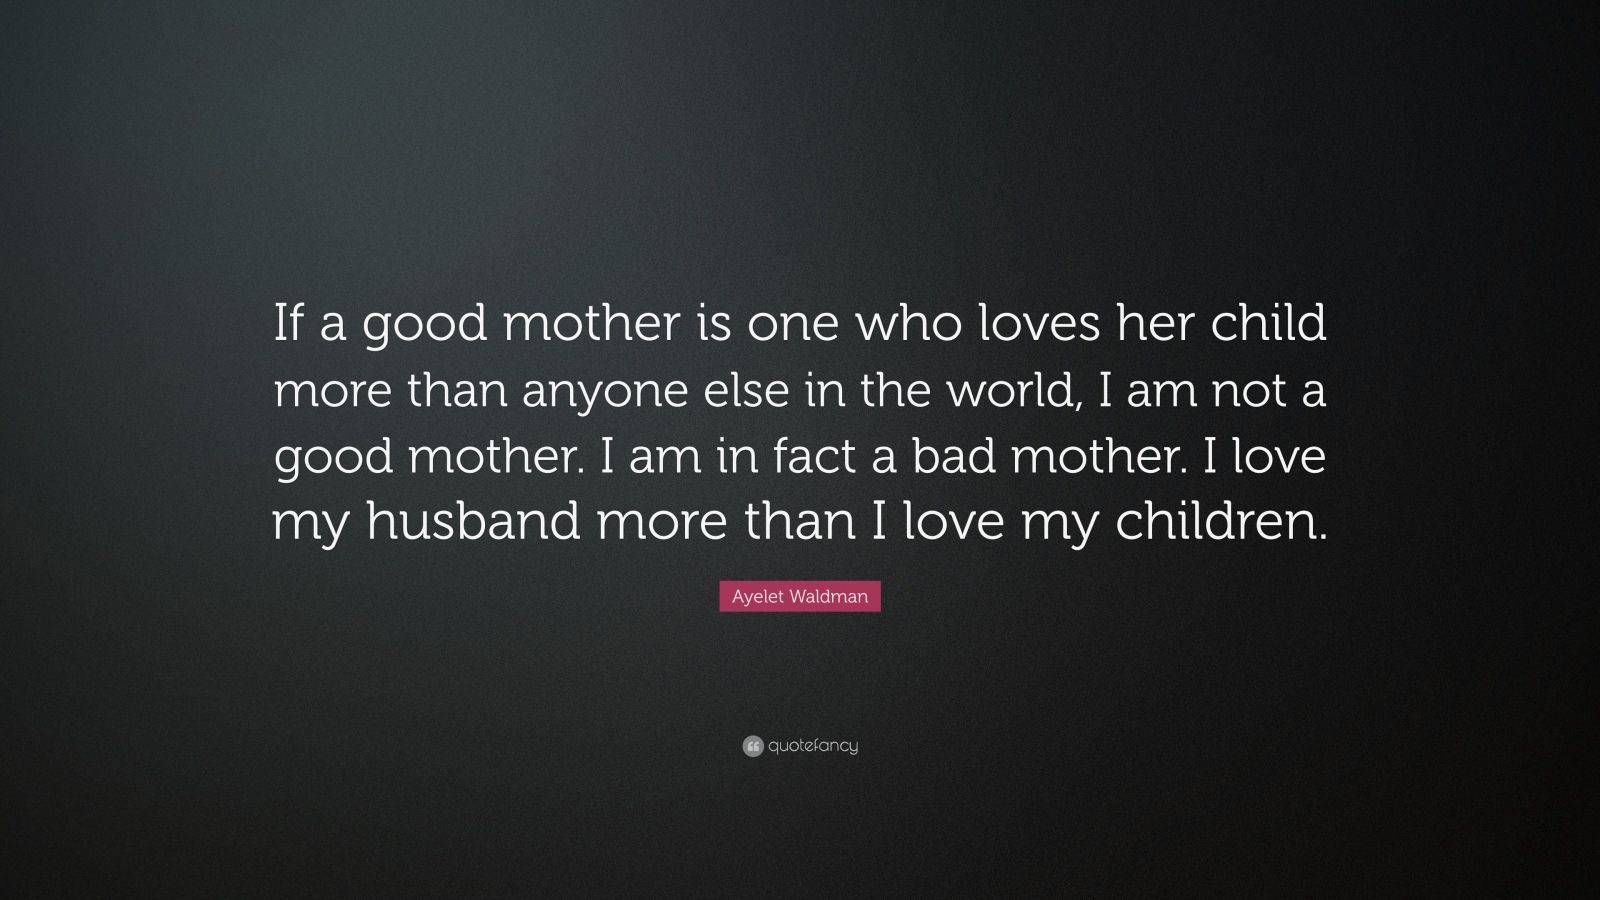 Ayelet Waldman Quote “If a good mother is one who loves her child more